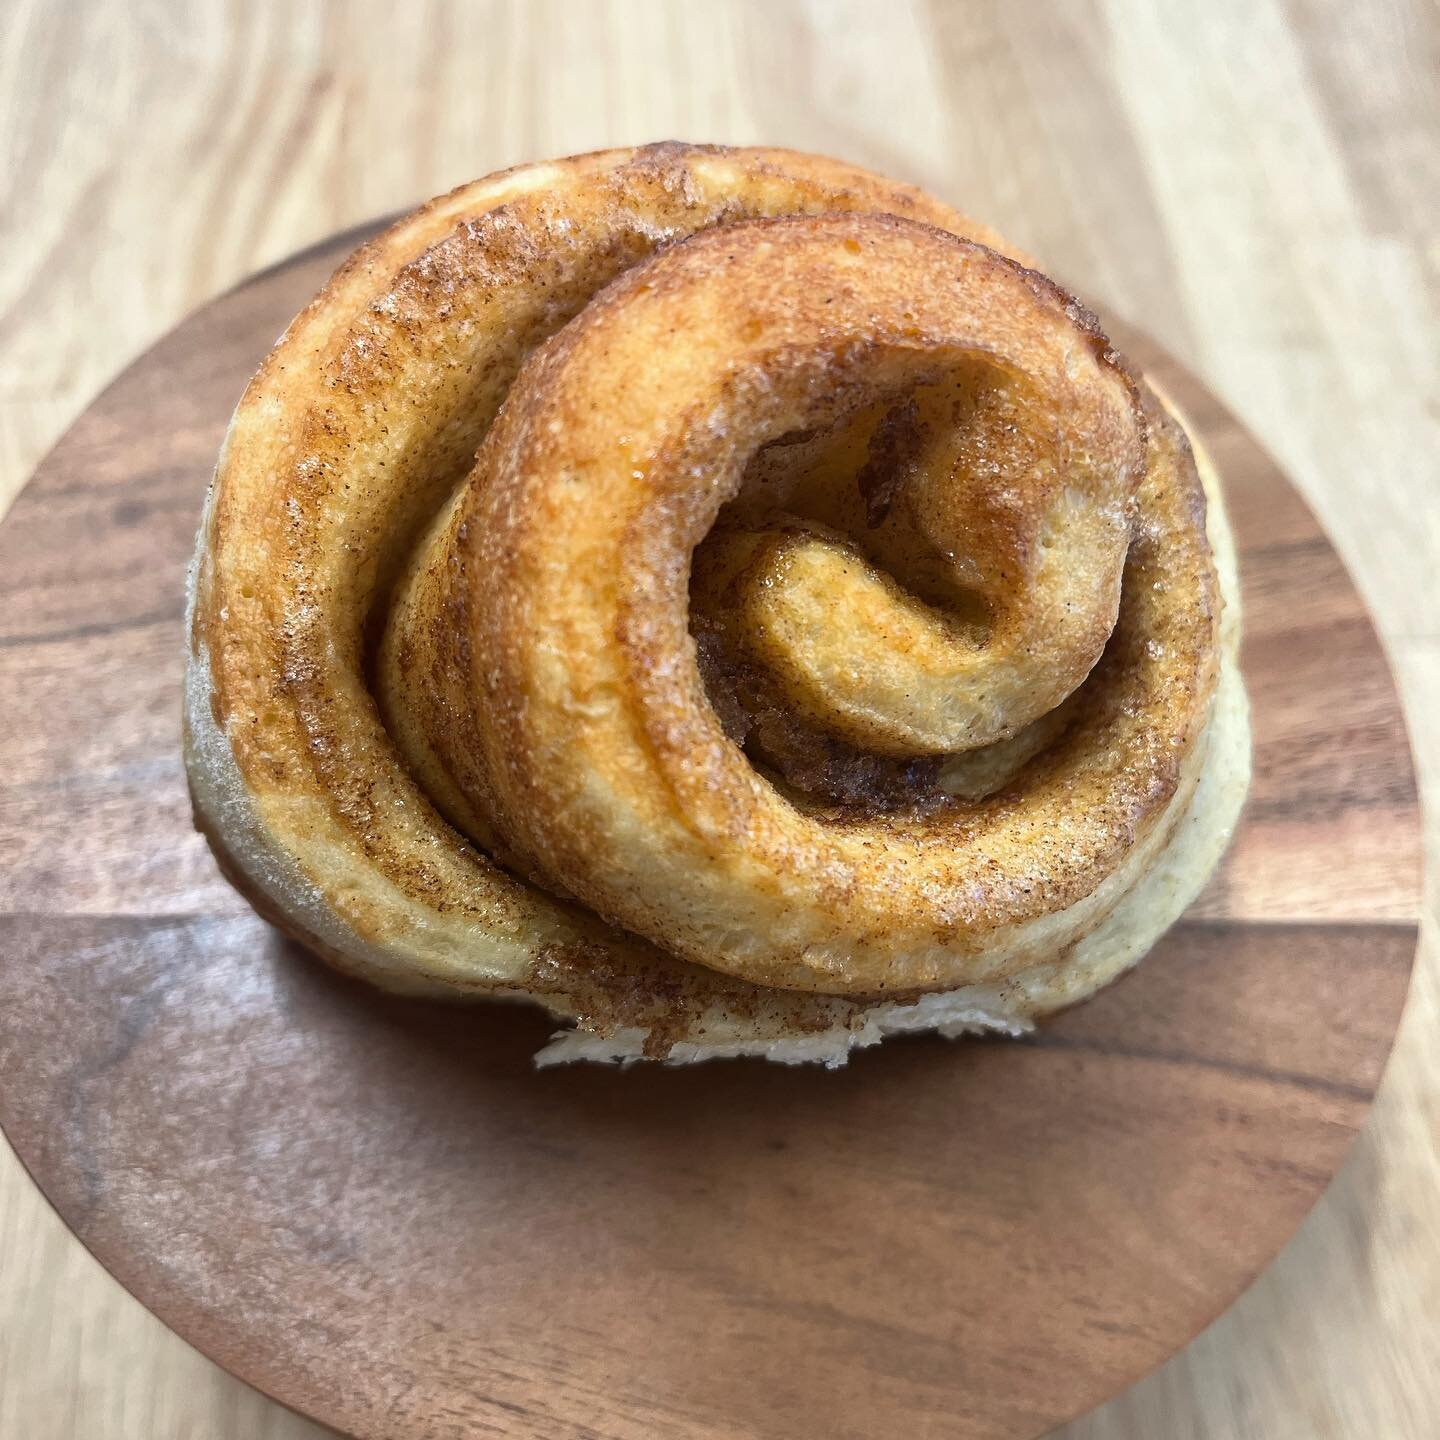 We&rsquo;re often asked what our signature item is, and this is it! An ooey gooey cinnamon roll. We make them with our challah dough and all the delicious butter and cinnamon super rolled up inside. Come and try one if you have not yet, we have lots 